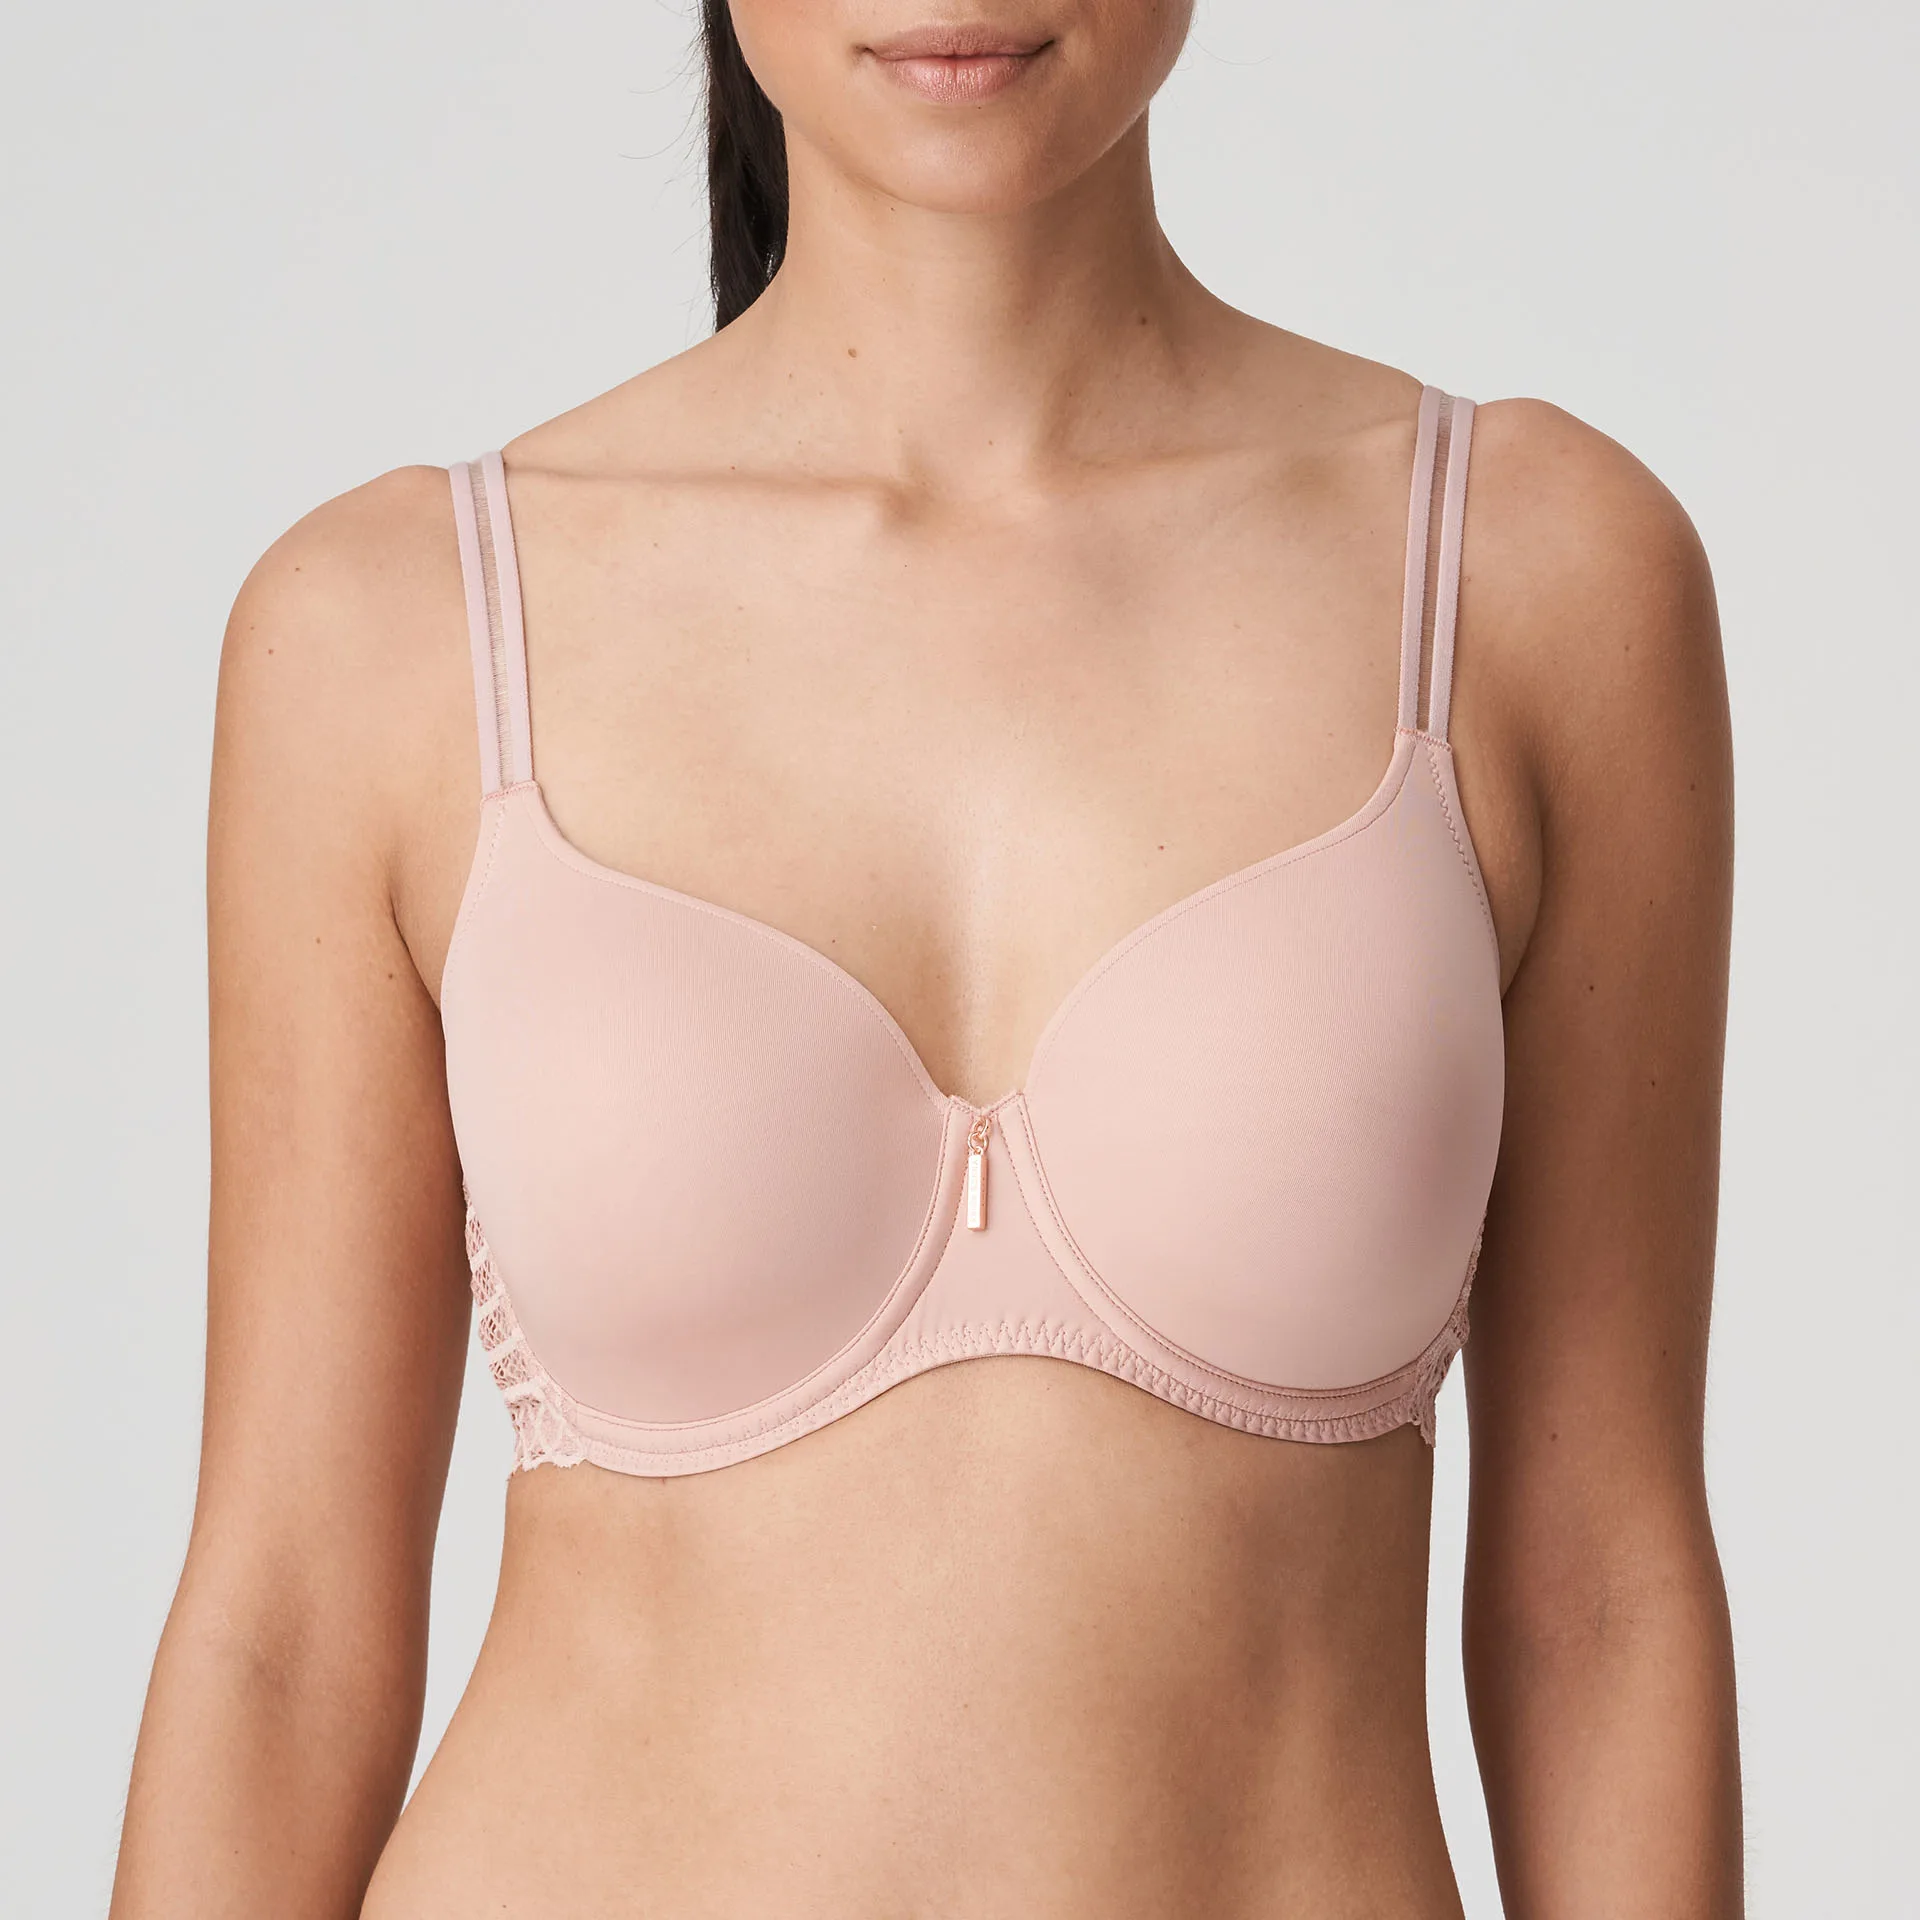 TW East End CHB padded bra - square